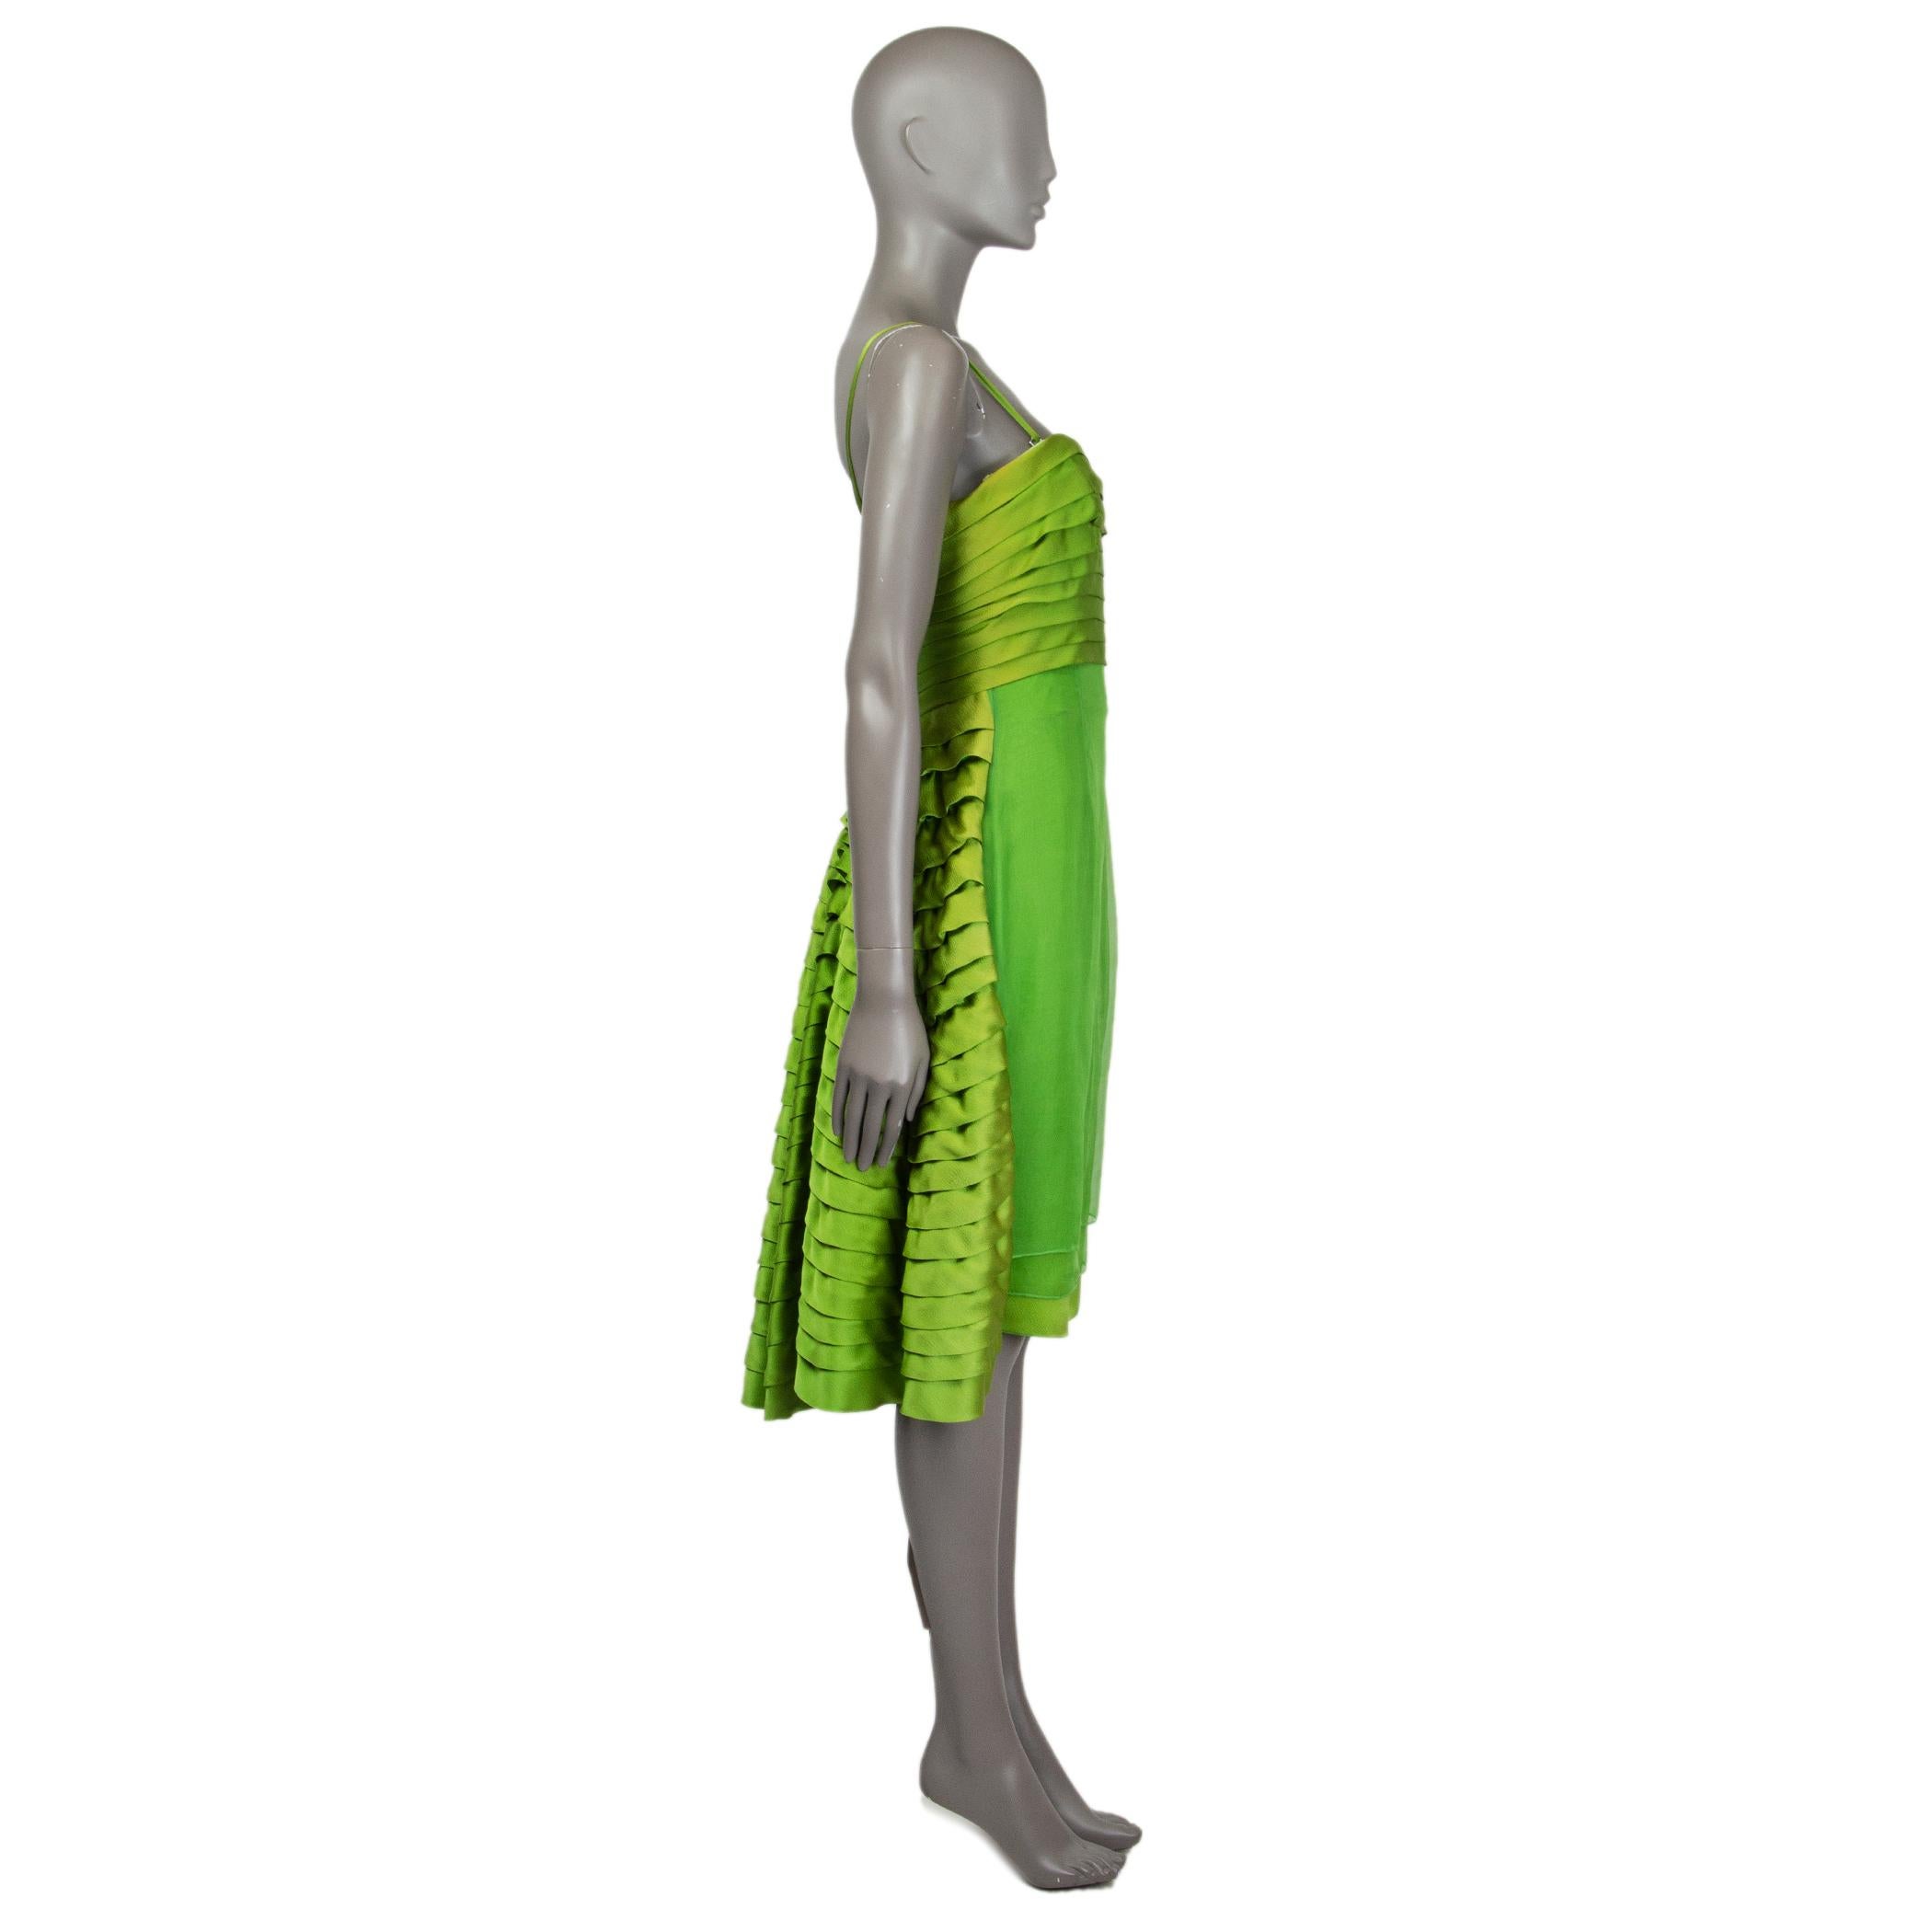 Christian Dior dress in chartreuse silk organza and satin (100%). With phorizontal pleating around the bust, wired bustier, ruffled panel on the back side, and layered skirt. Features removable shoulder straps. Closes with invisible zipper on the